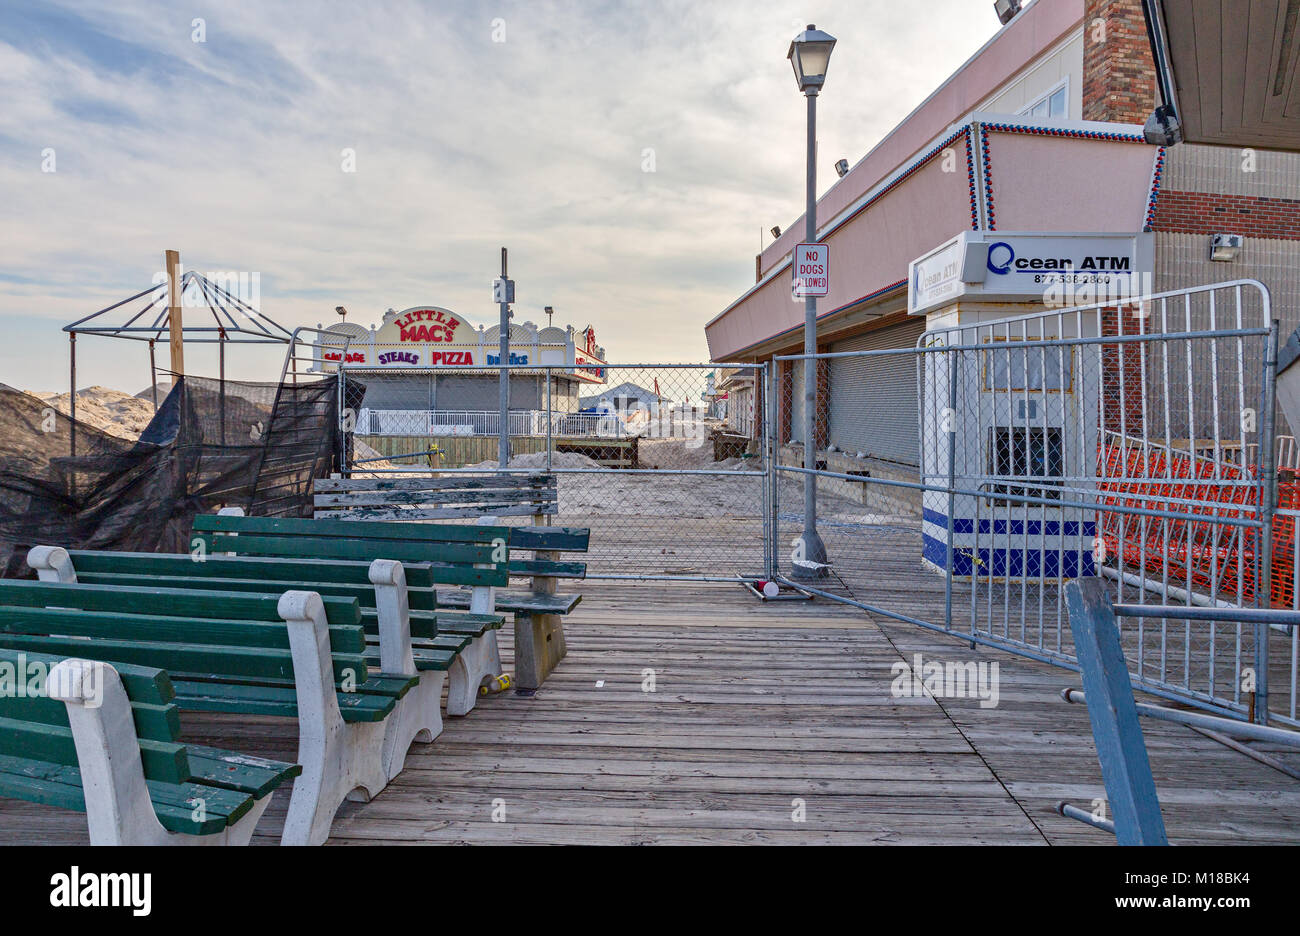 The Point Pleasant Beach, New Jersey damaged boardwalk after Hurricane Sandy Stock Photo